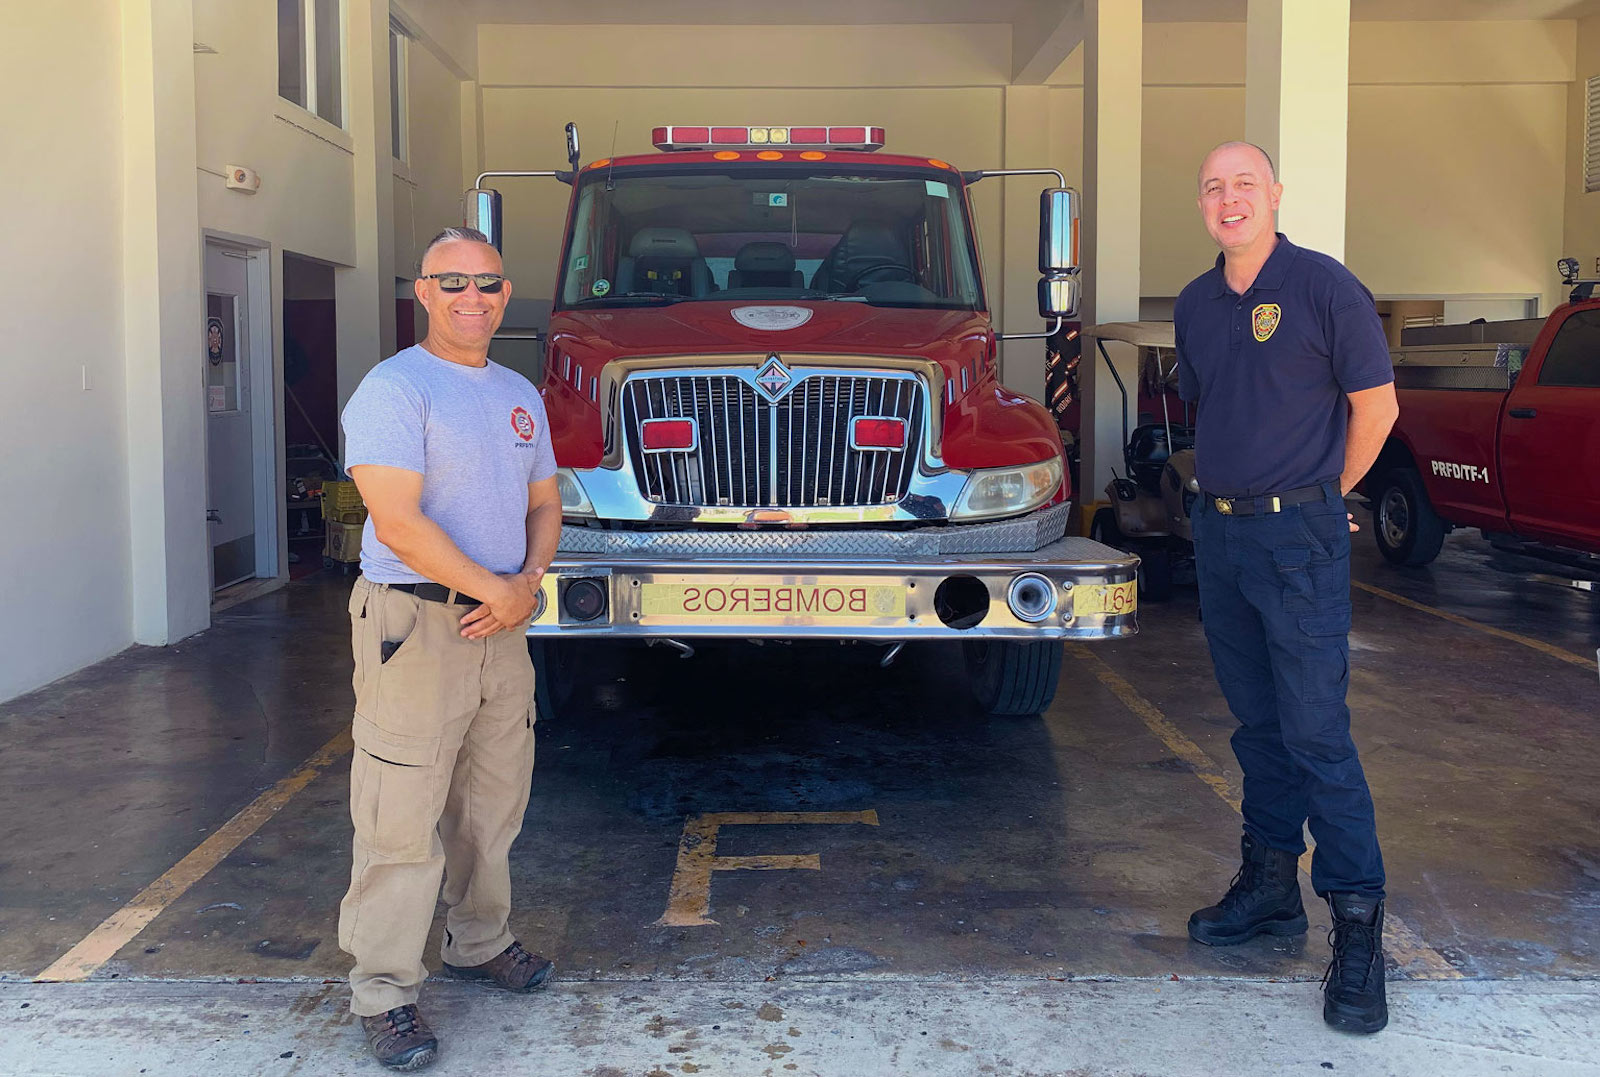 Sergeant Luis Saez, left, and Edgardo Gelabert Santiago are on duty at the solar-powered fire station in Guánica, Puerto Rico.